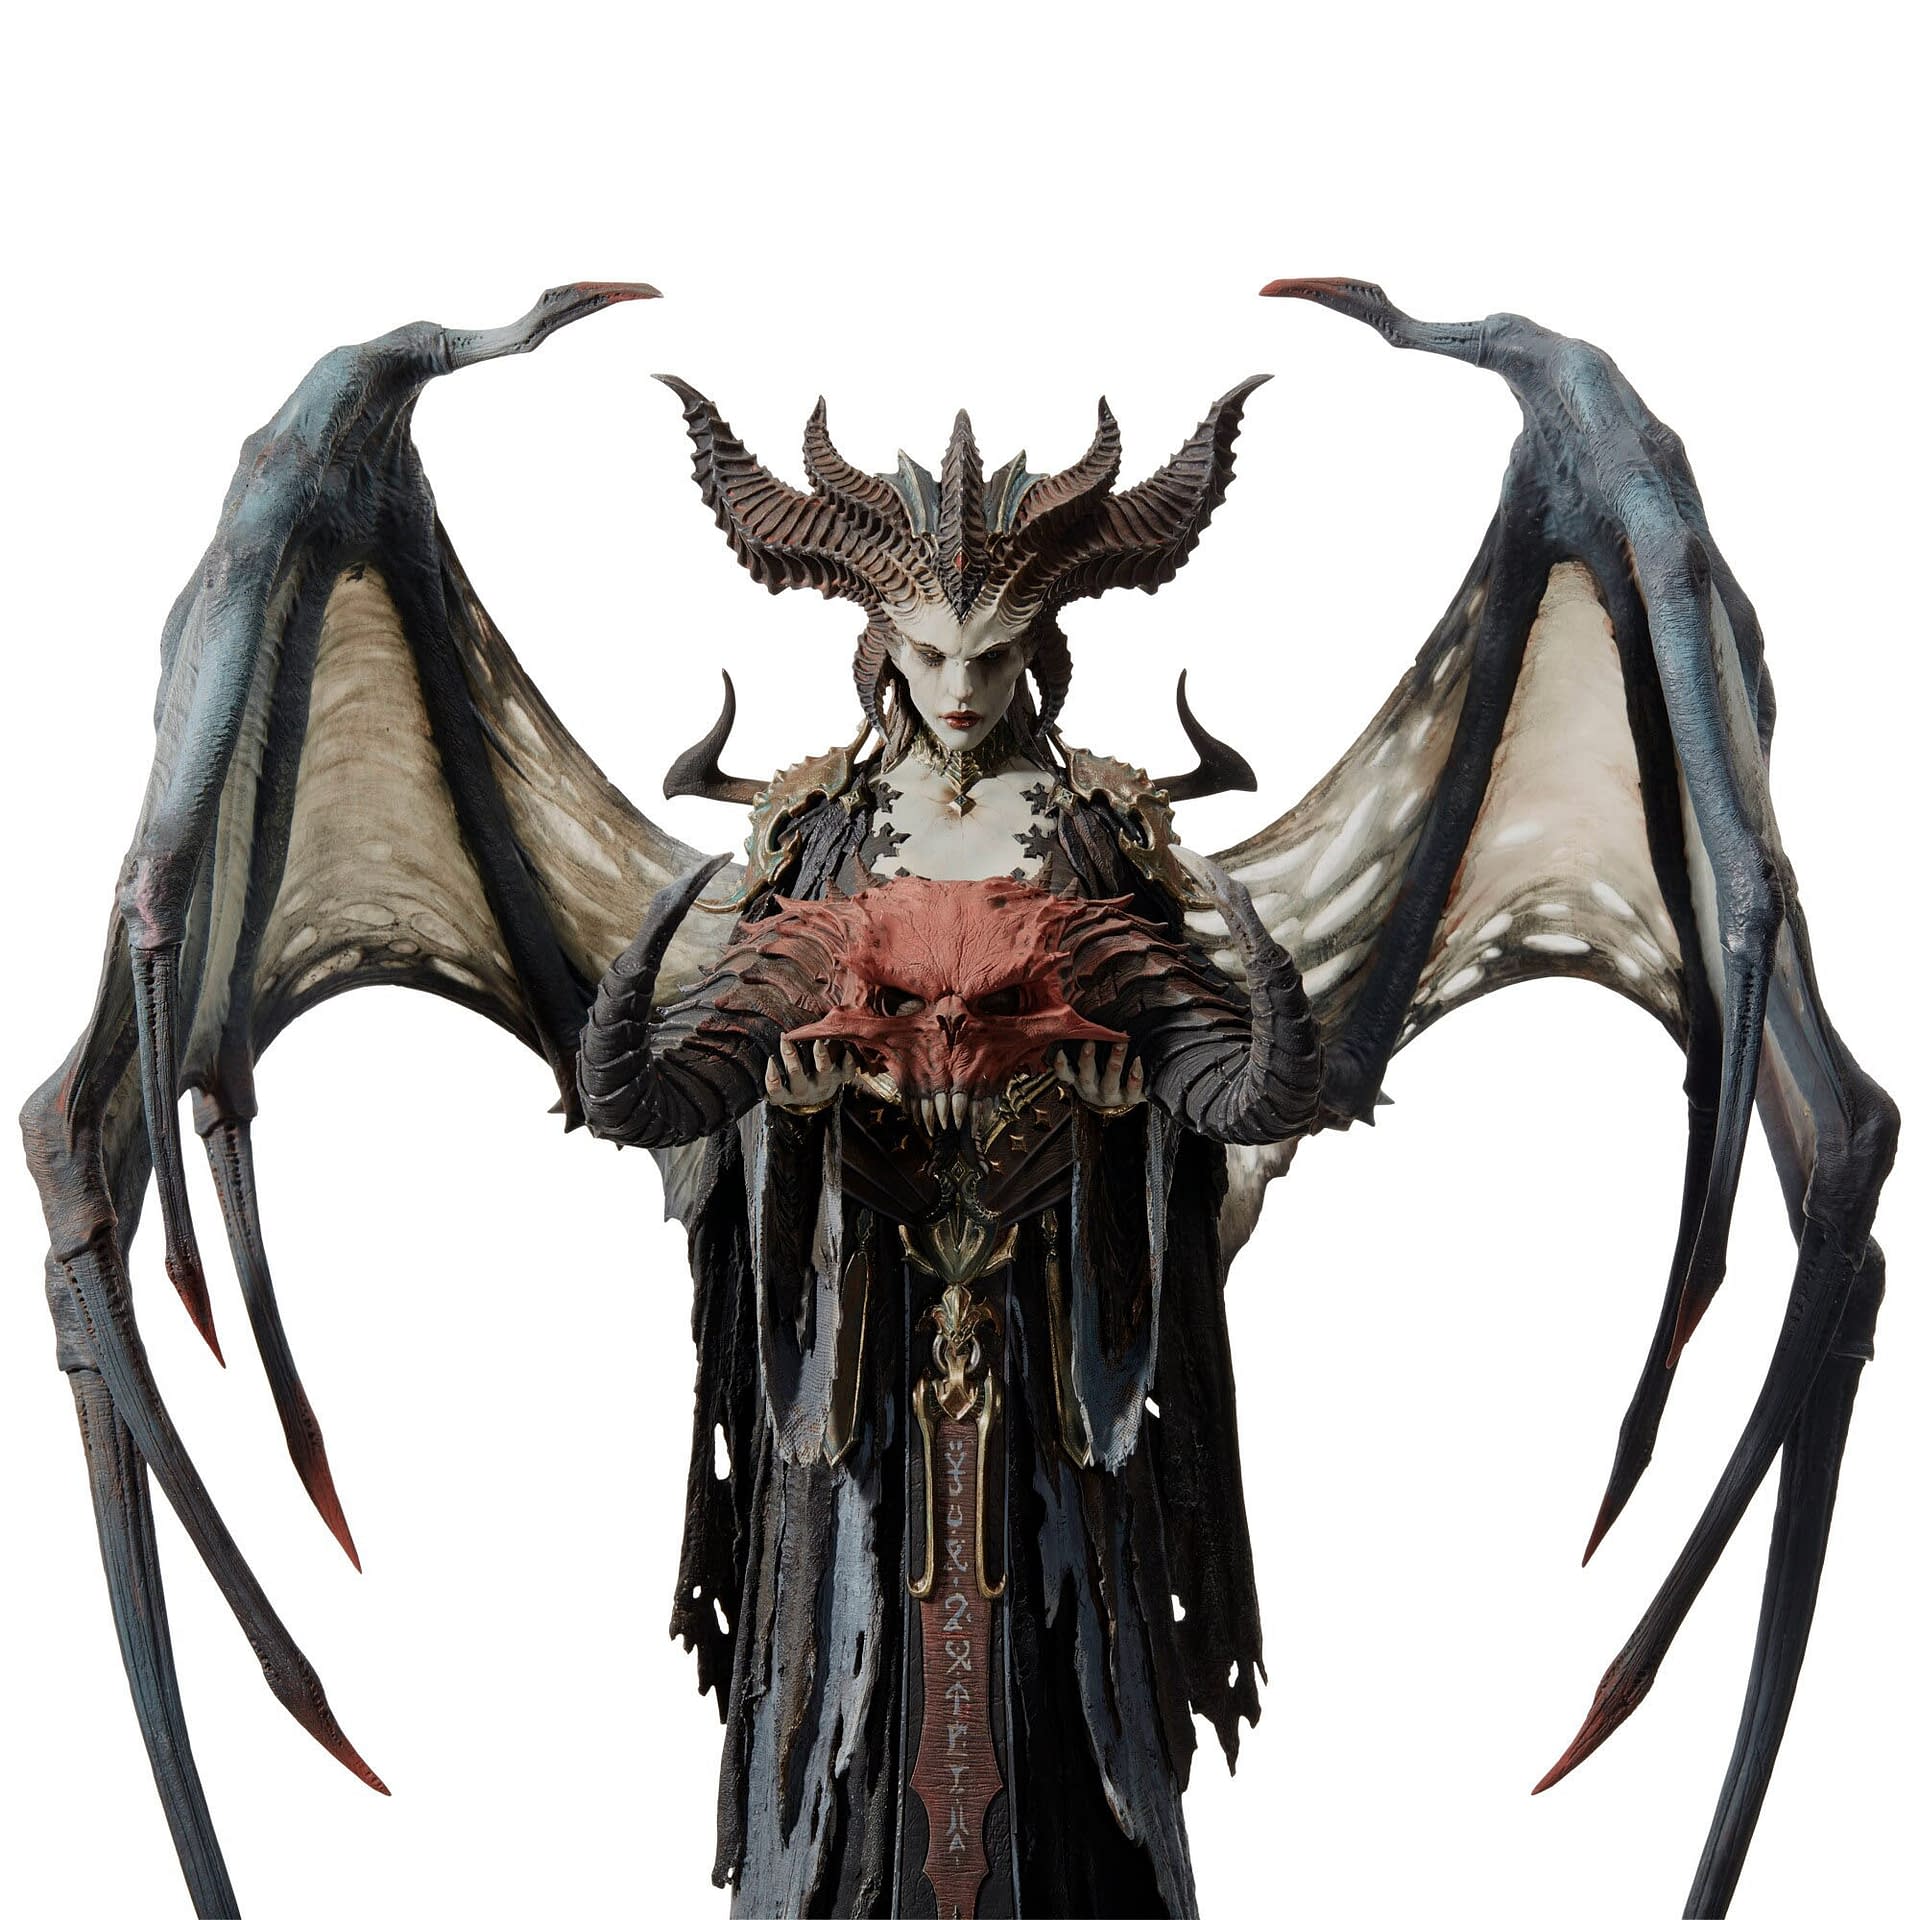 "Diablo IV" Lilith Has Arrived in New Premium Statue from Blizzard